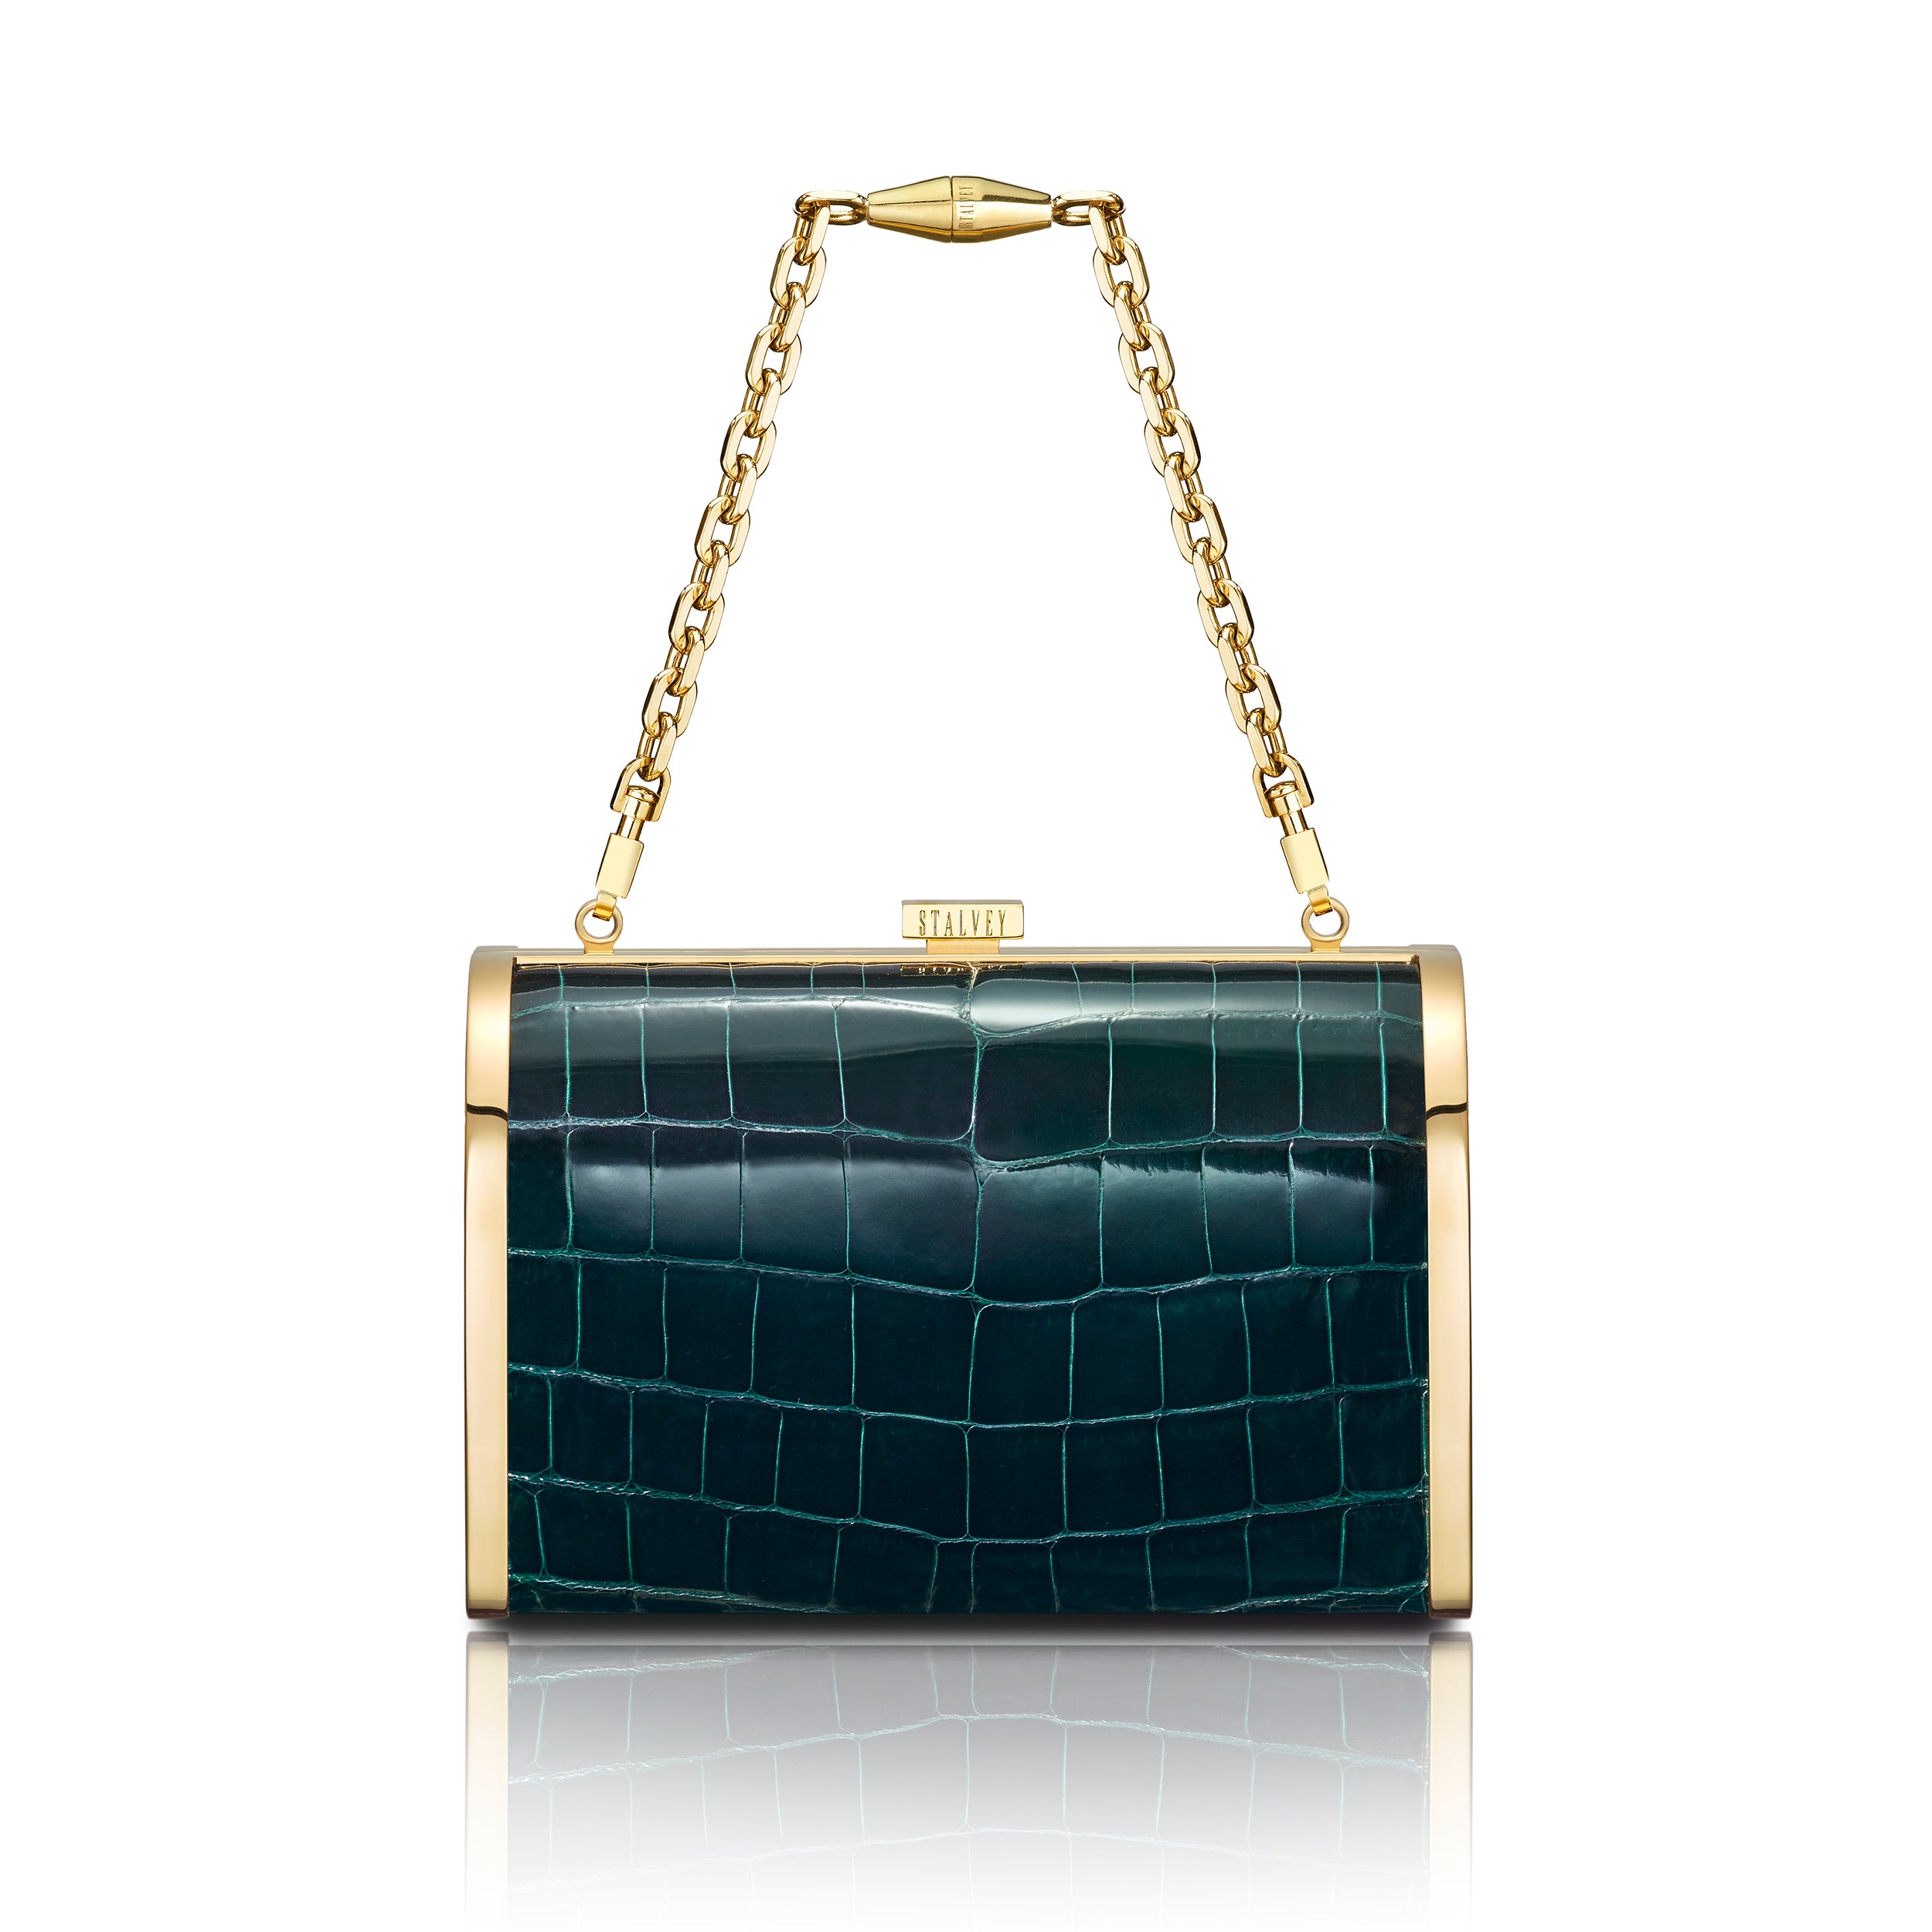 STALVEY Rounded Clutch in Emerald Alligator with 24kt Gold Hardware Front View with Chain